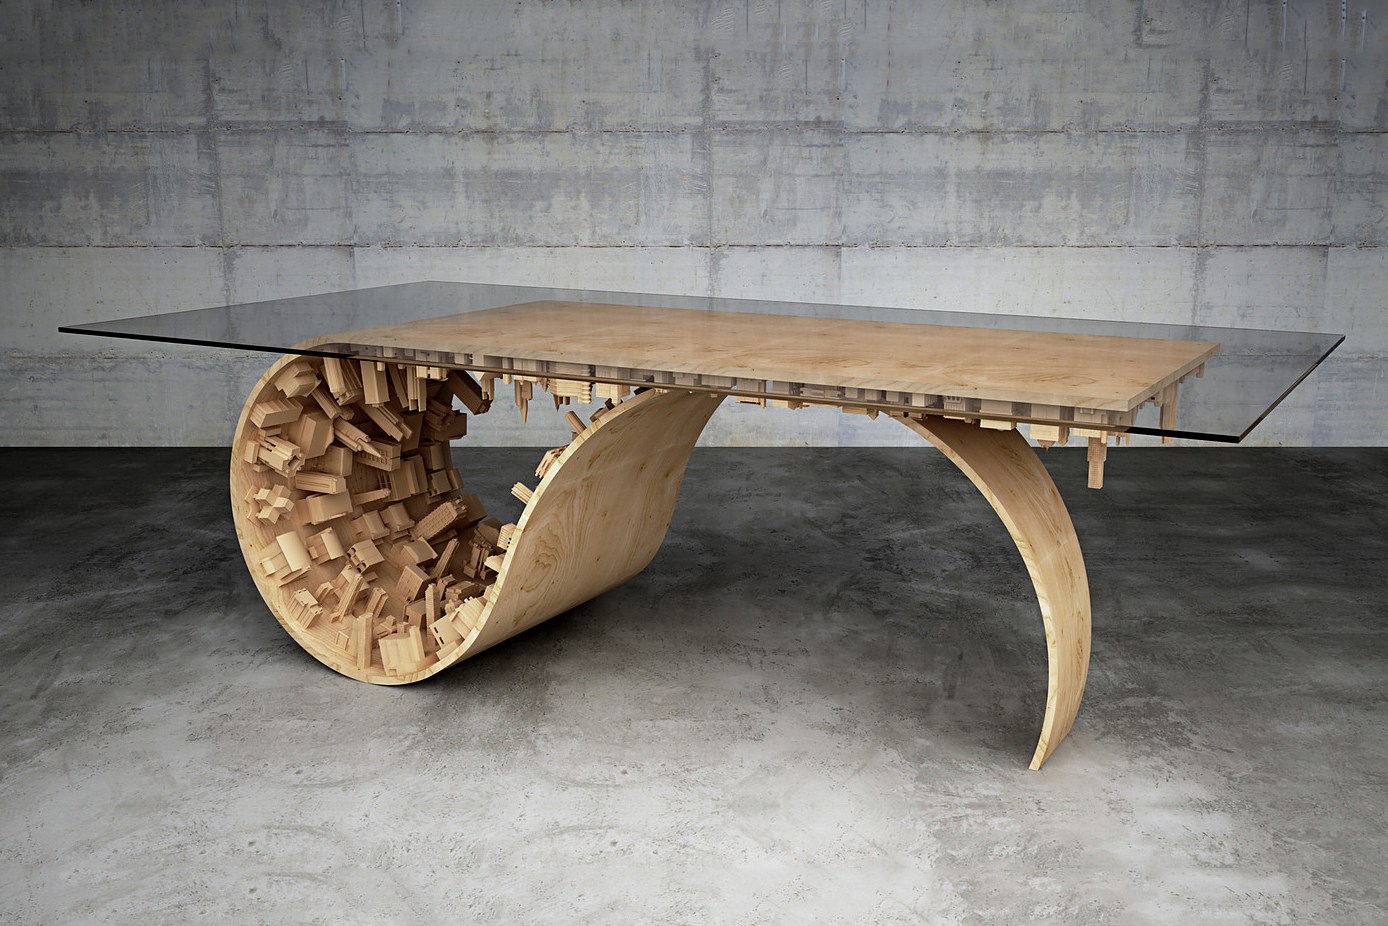 wave-city-dining-table-by-stelios-mousarris-2